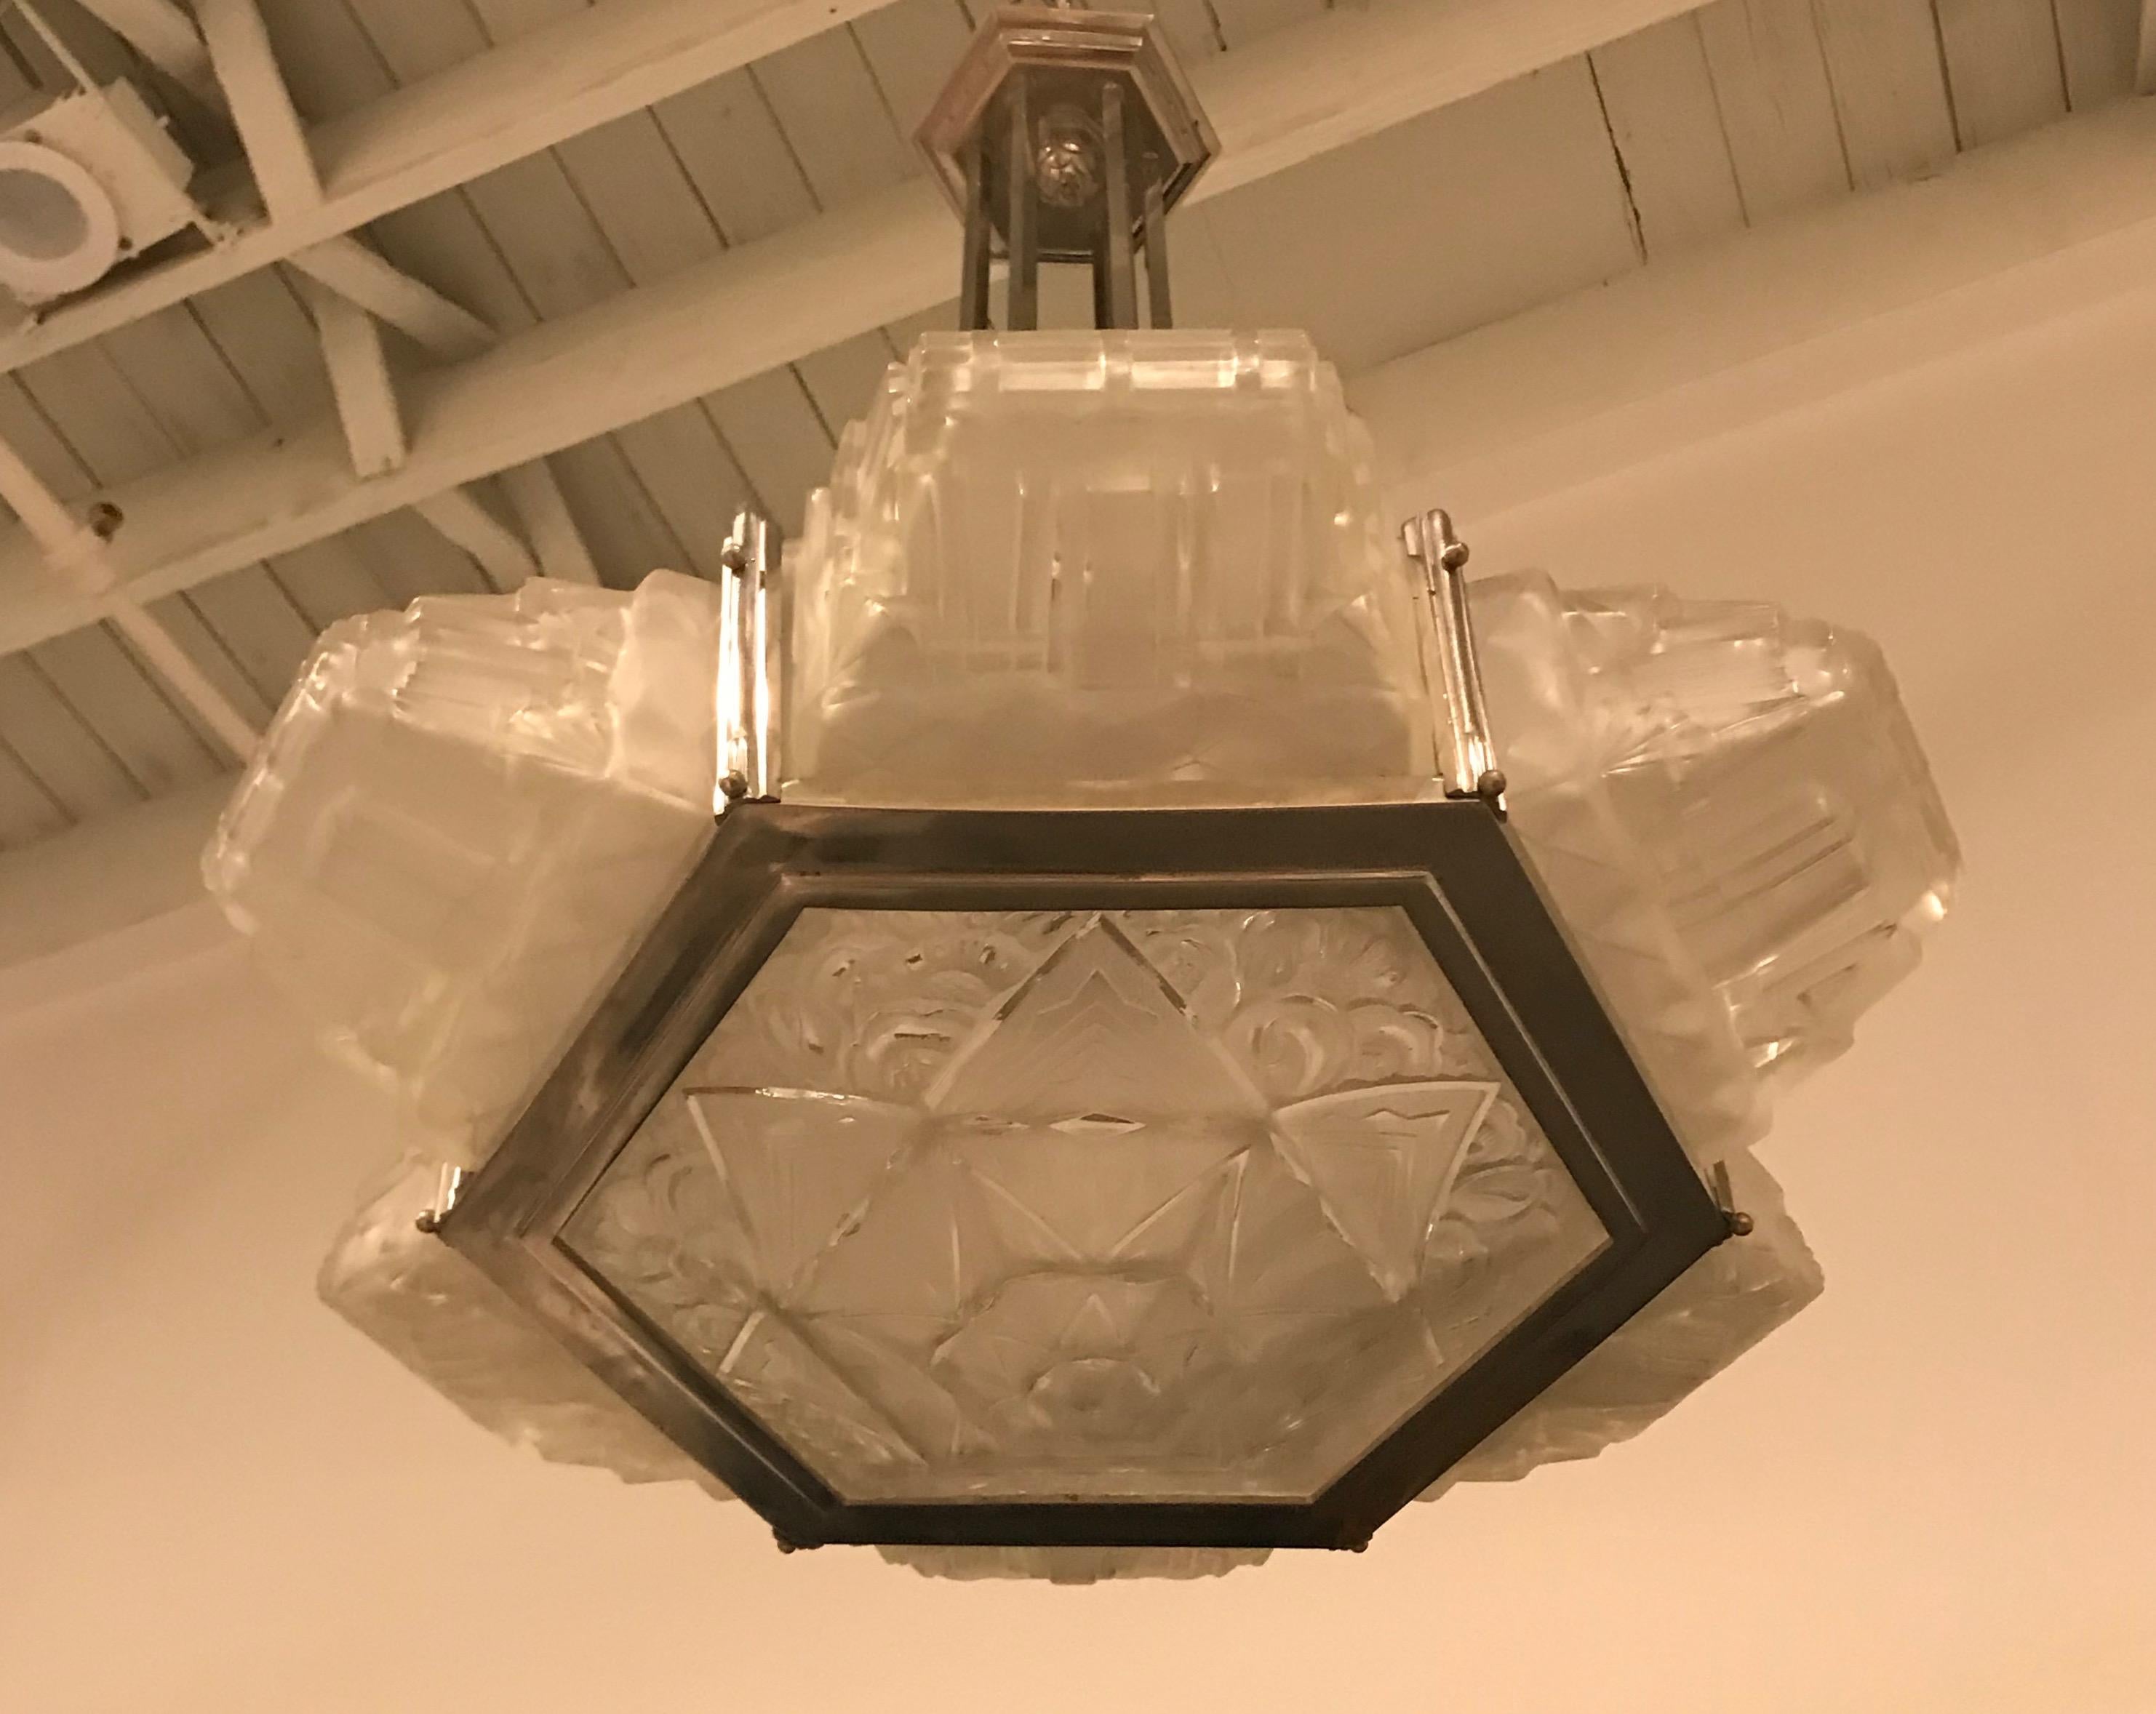 20th Century French Art Deco Pendant Chandelier by Hanots For Sale